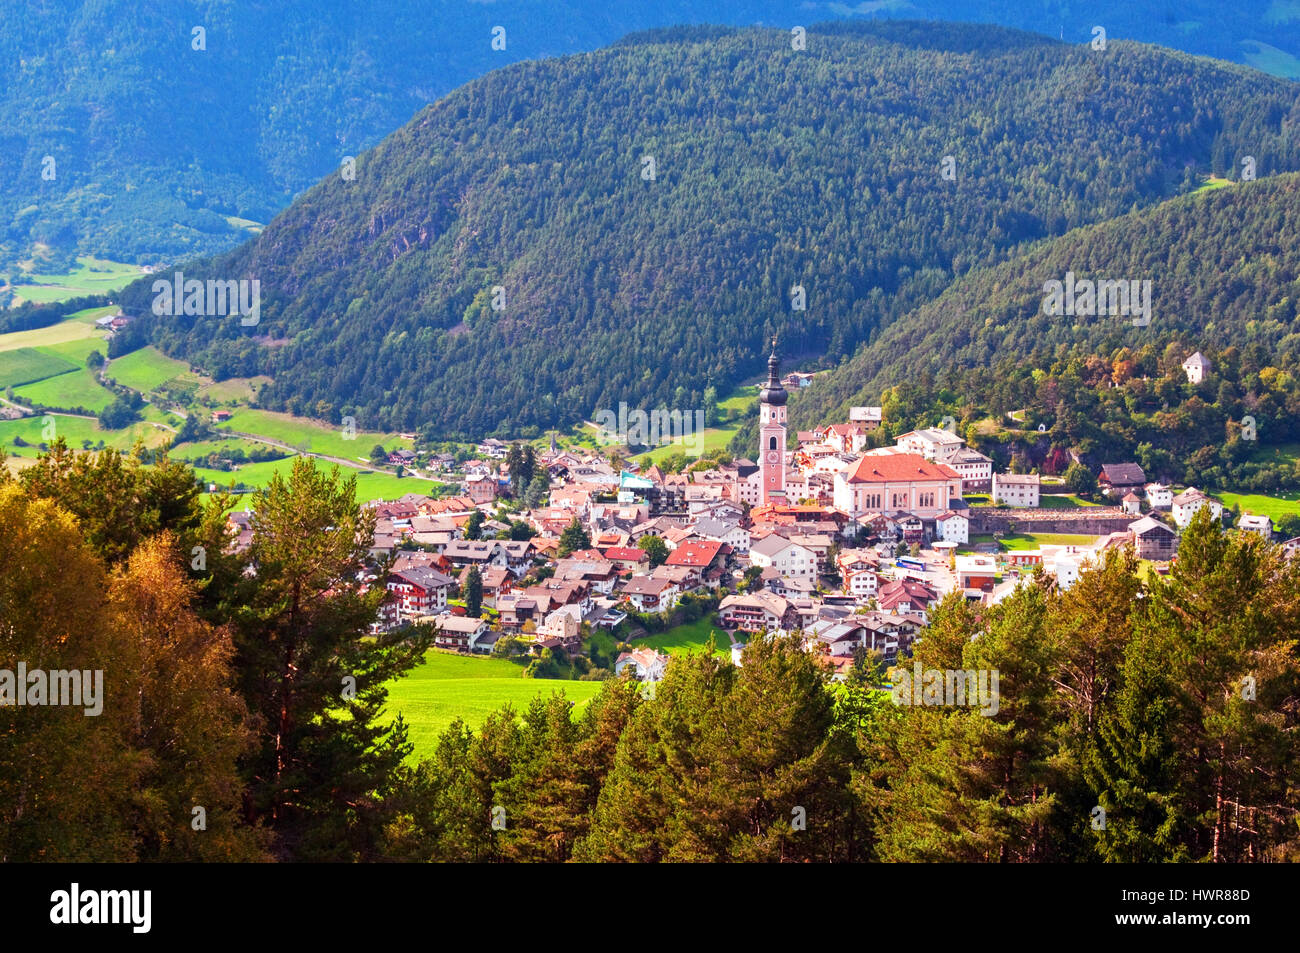 Castelrotto/Kastelruth nestled in the valley, northern Italy Stock Photo